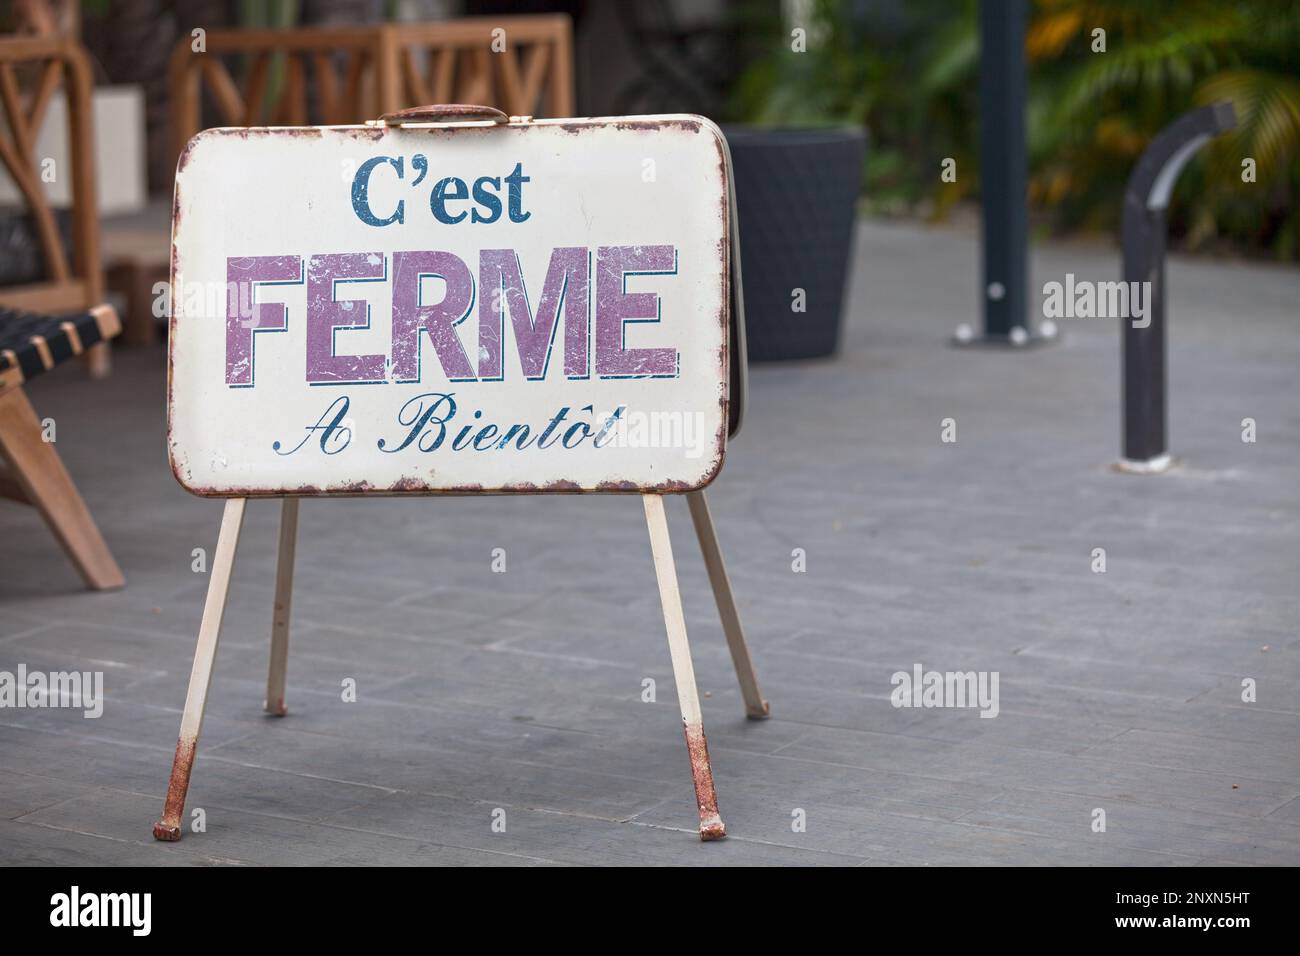 Metallic outdoor shop sign stating in french “C'est FERMÉ à Bientôt”, meaning in english “It's CLOSED see you soon”. Stock Photo